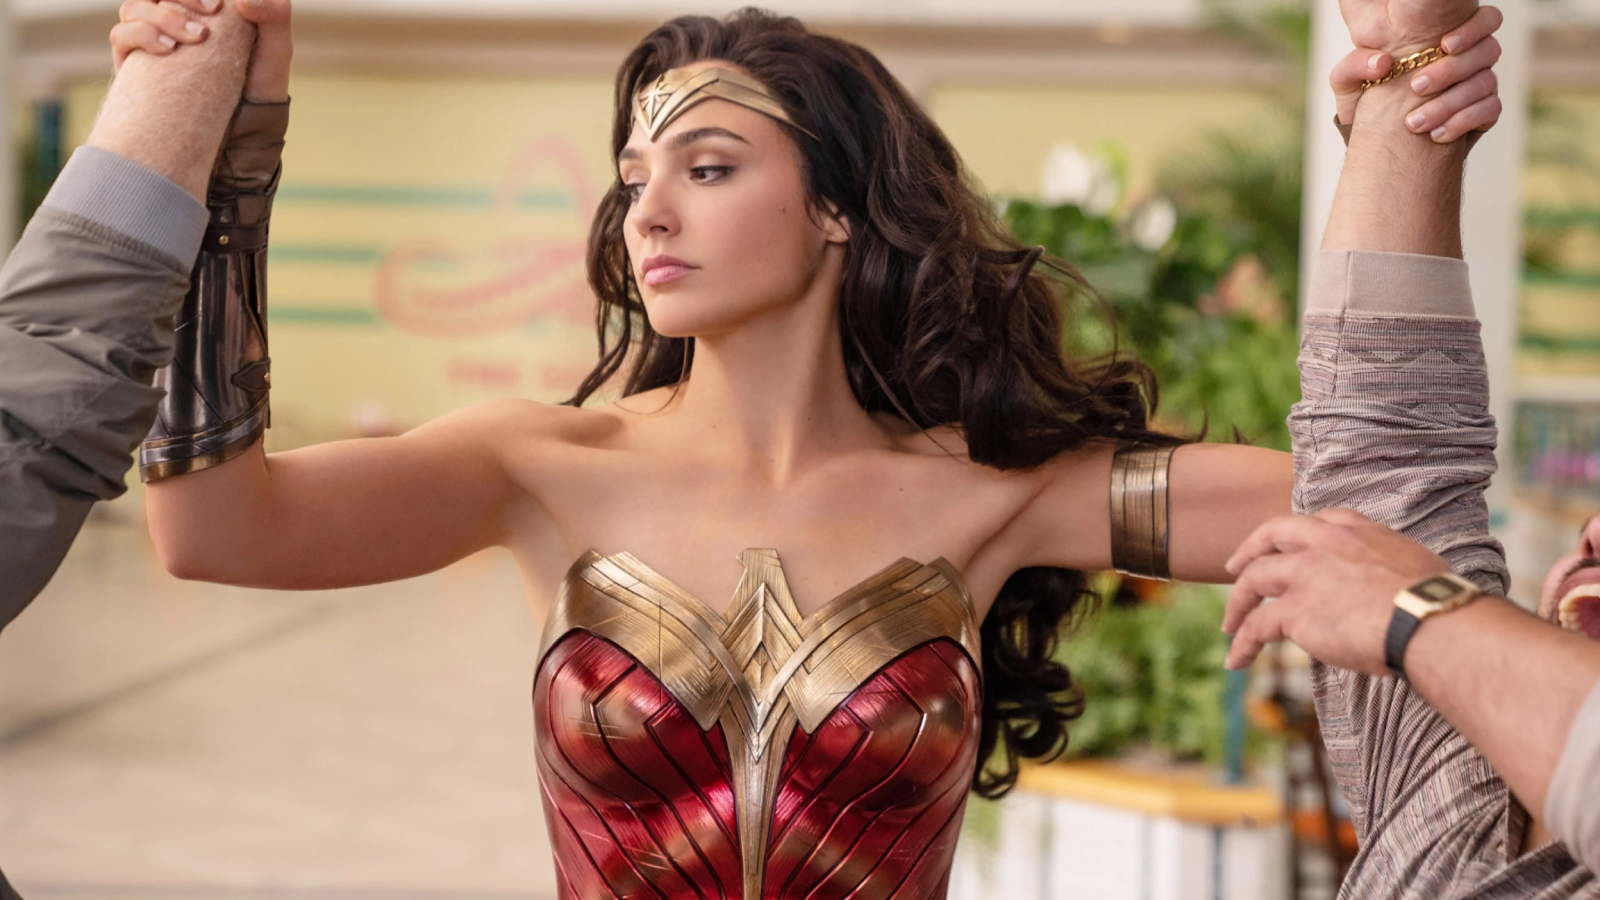 The Pre-Wonder Woman Roles That Almost Made Gal Gadot a Star